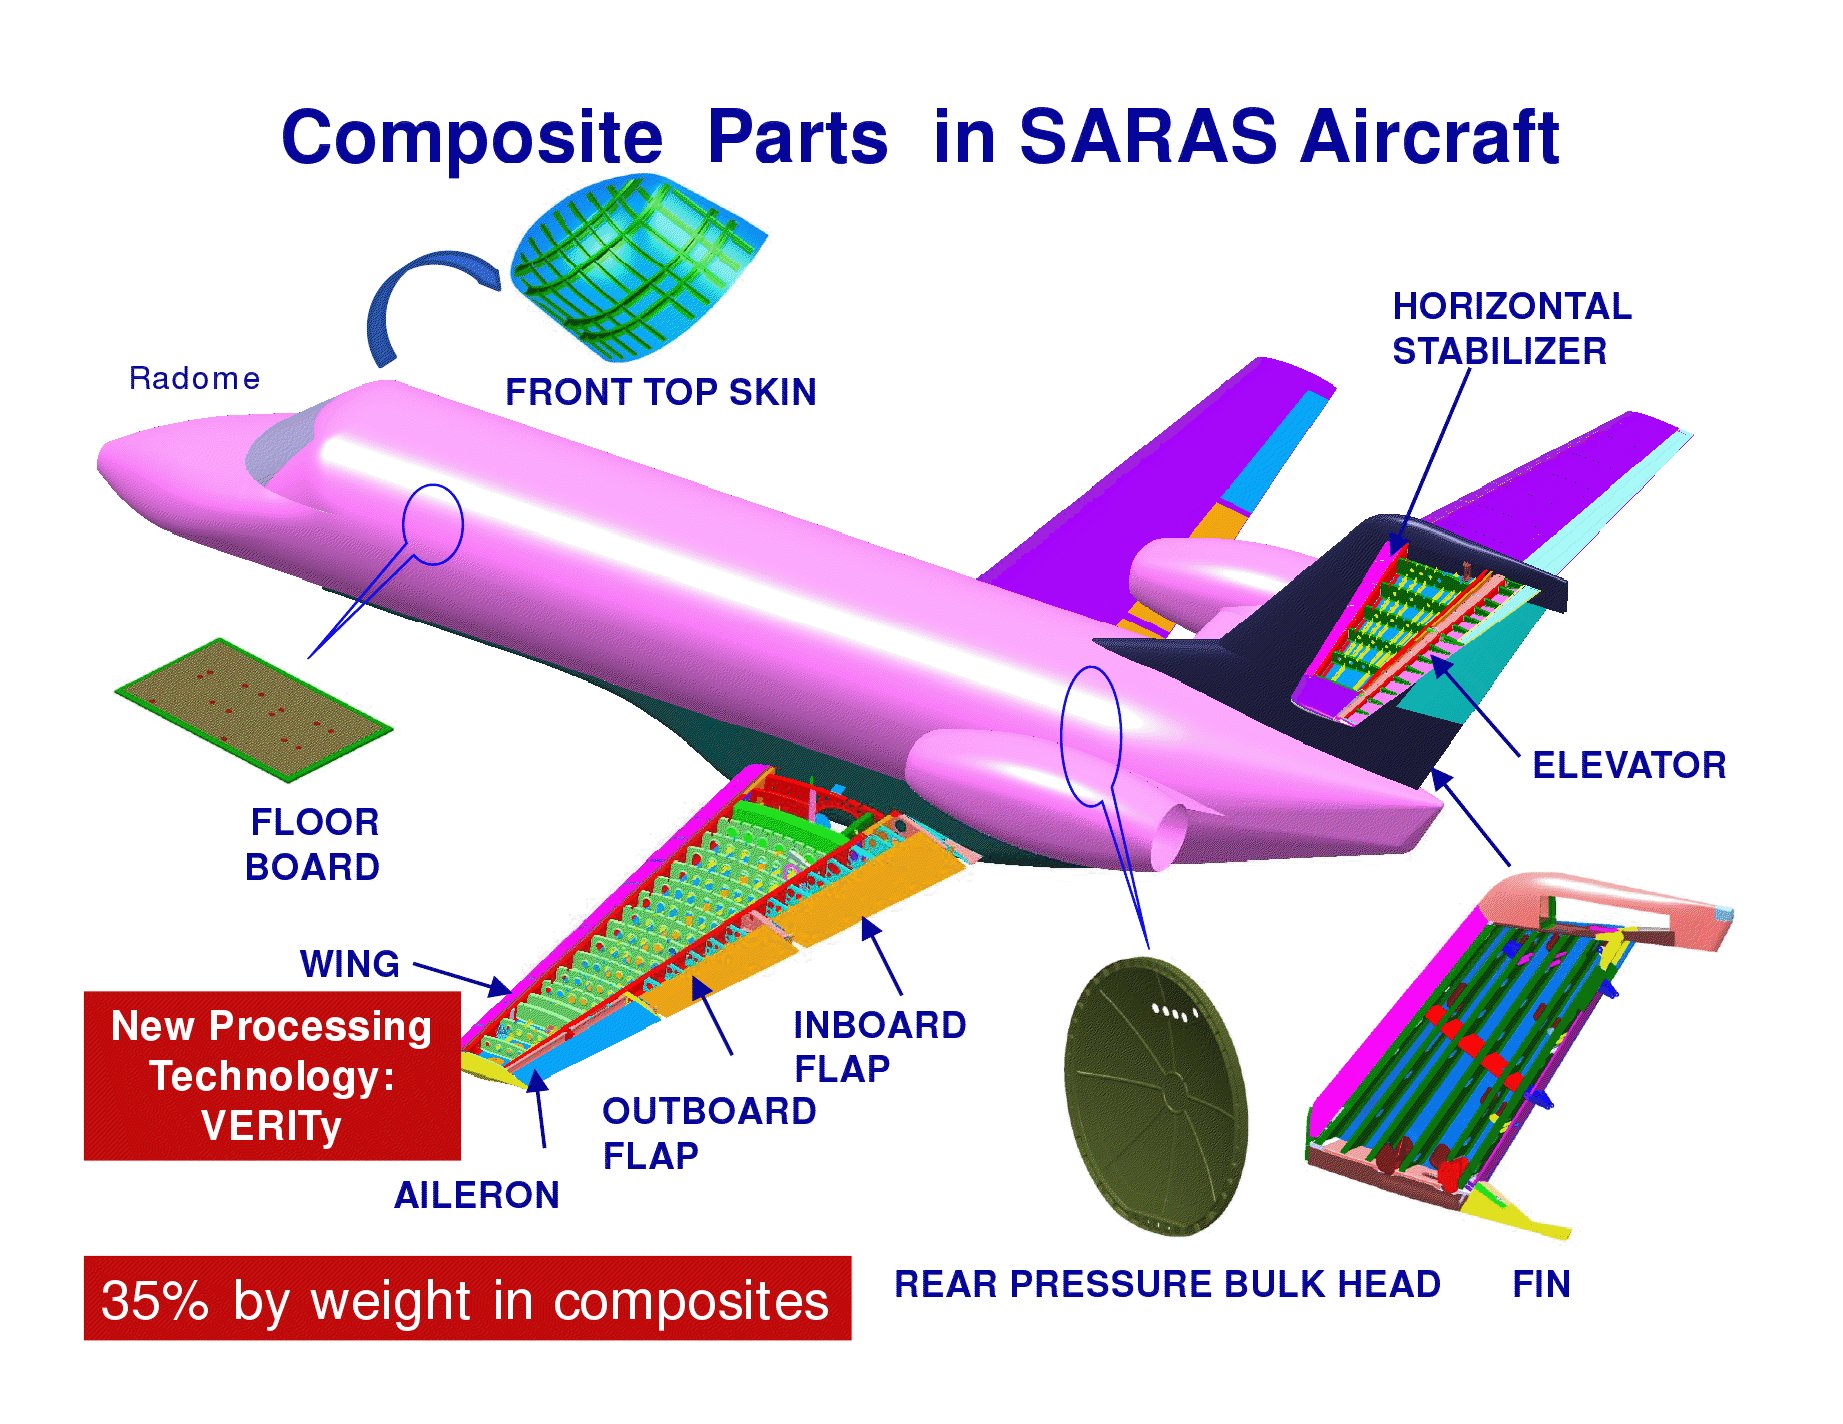 India-NAL-SARAS-Aircraft-www.aame.in-Composite.jpg